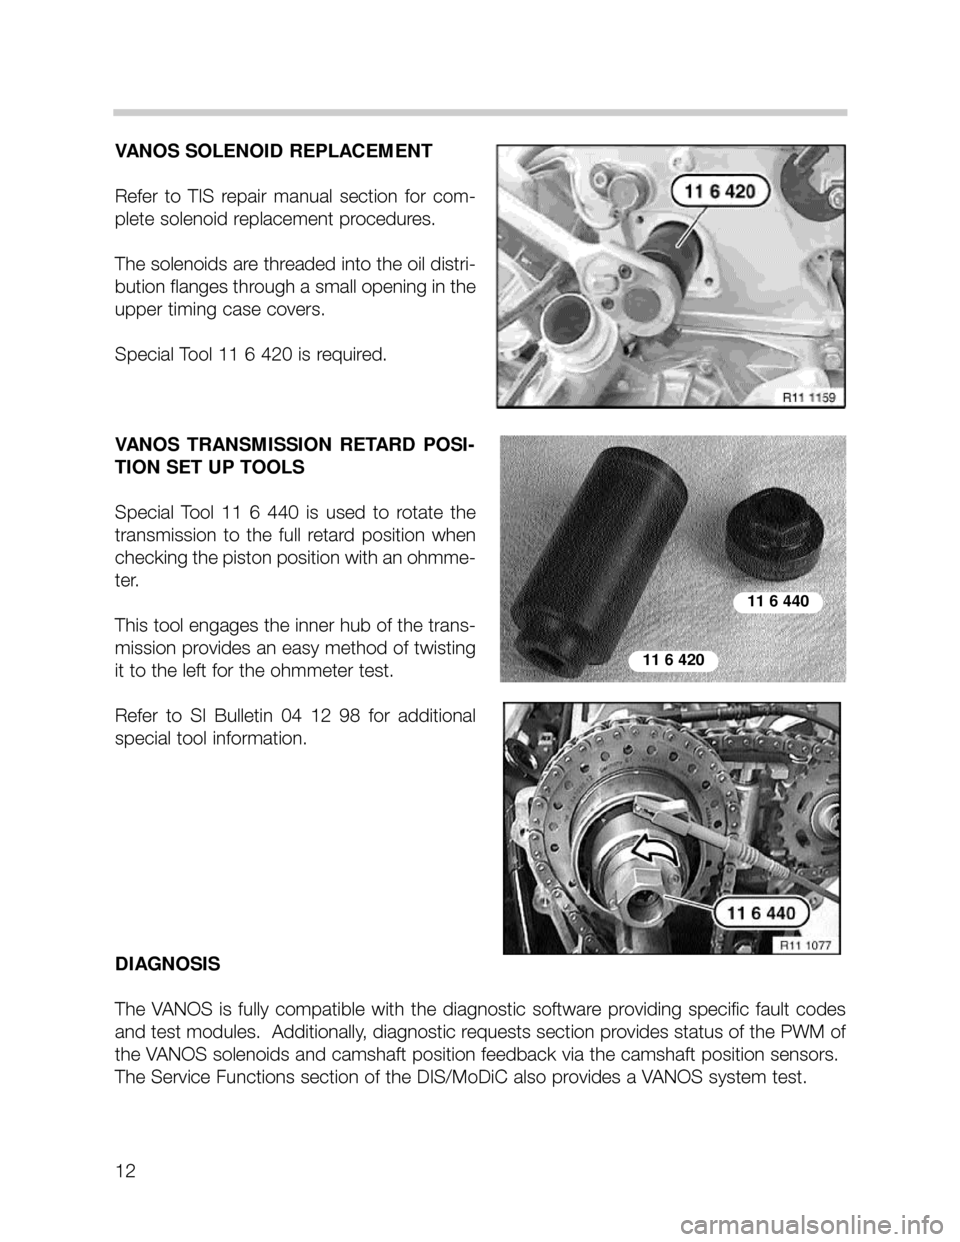 BMW 740i 2001 E38 M62TU Engine User Guide 12
VANOS SOLENOID REPLACEMENT
Refer  to  TIS  repair  manual  section  for  com-
plete solenoid replacement procedures.  
The solenoids are threaded into the oil distri-
bution flanges through a small